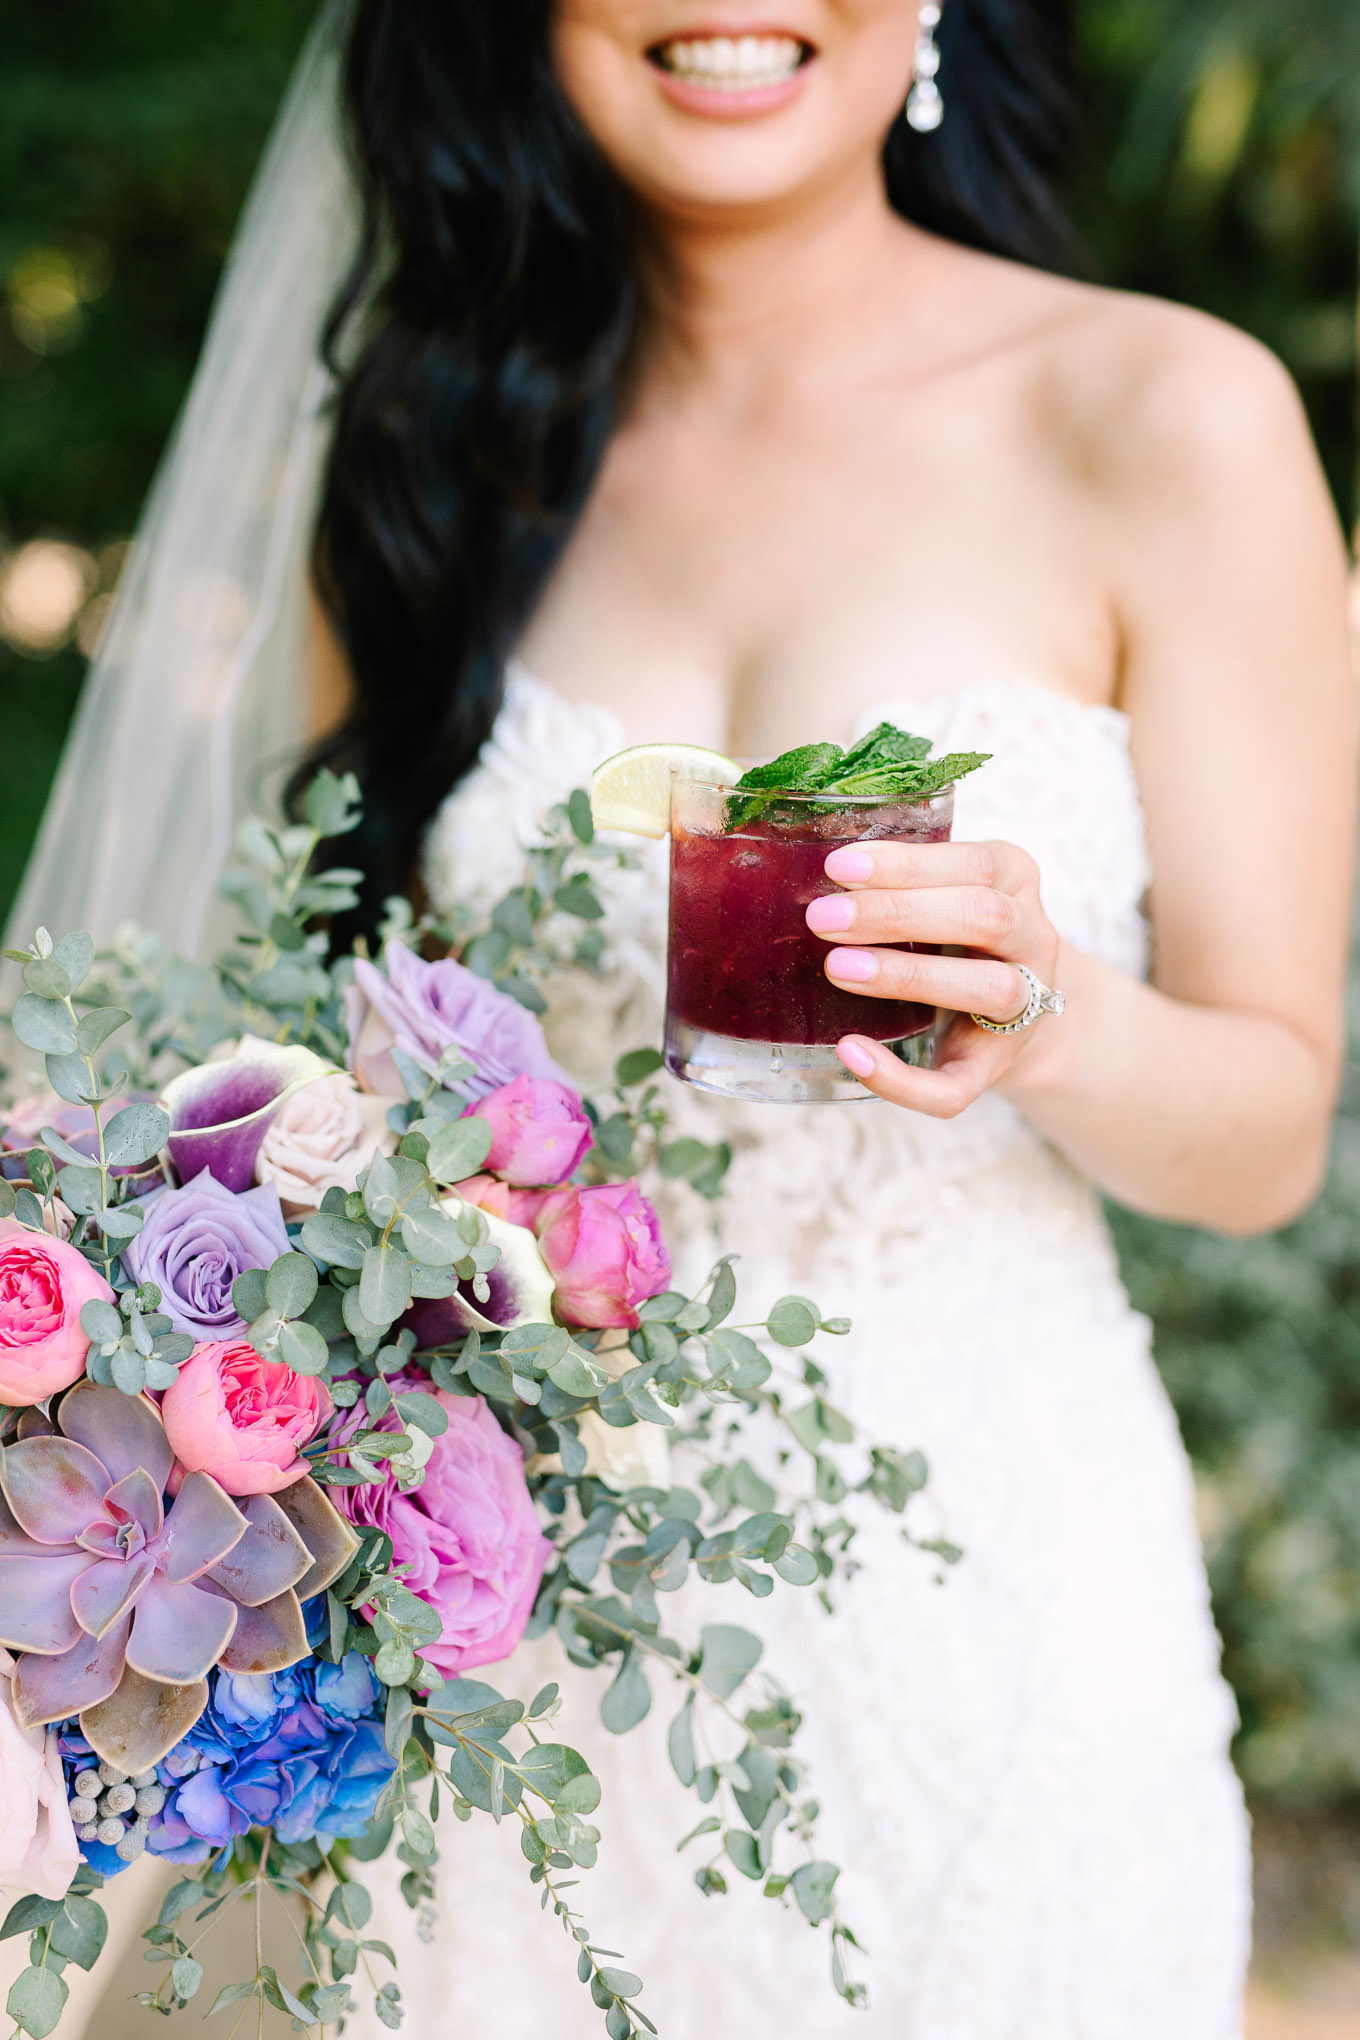 Malibou Lake Lodge wedding | Wedding and elopement photography roundup | Los Angeles and Palm Springs photographer | #losangeleswedding #palmspringswedding #elopementphotographer Source: Mary Costa Photography | Los Angeles